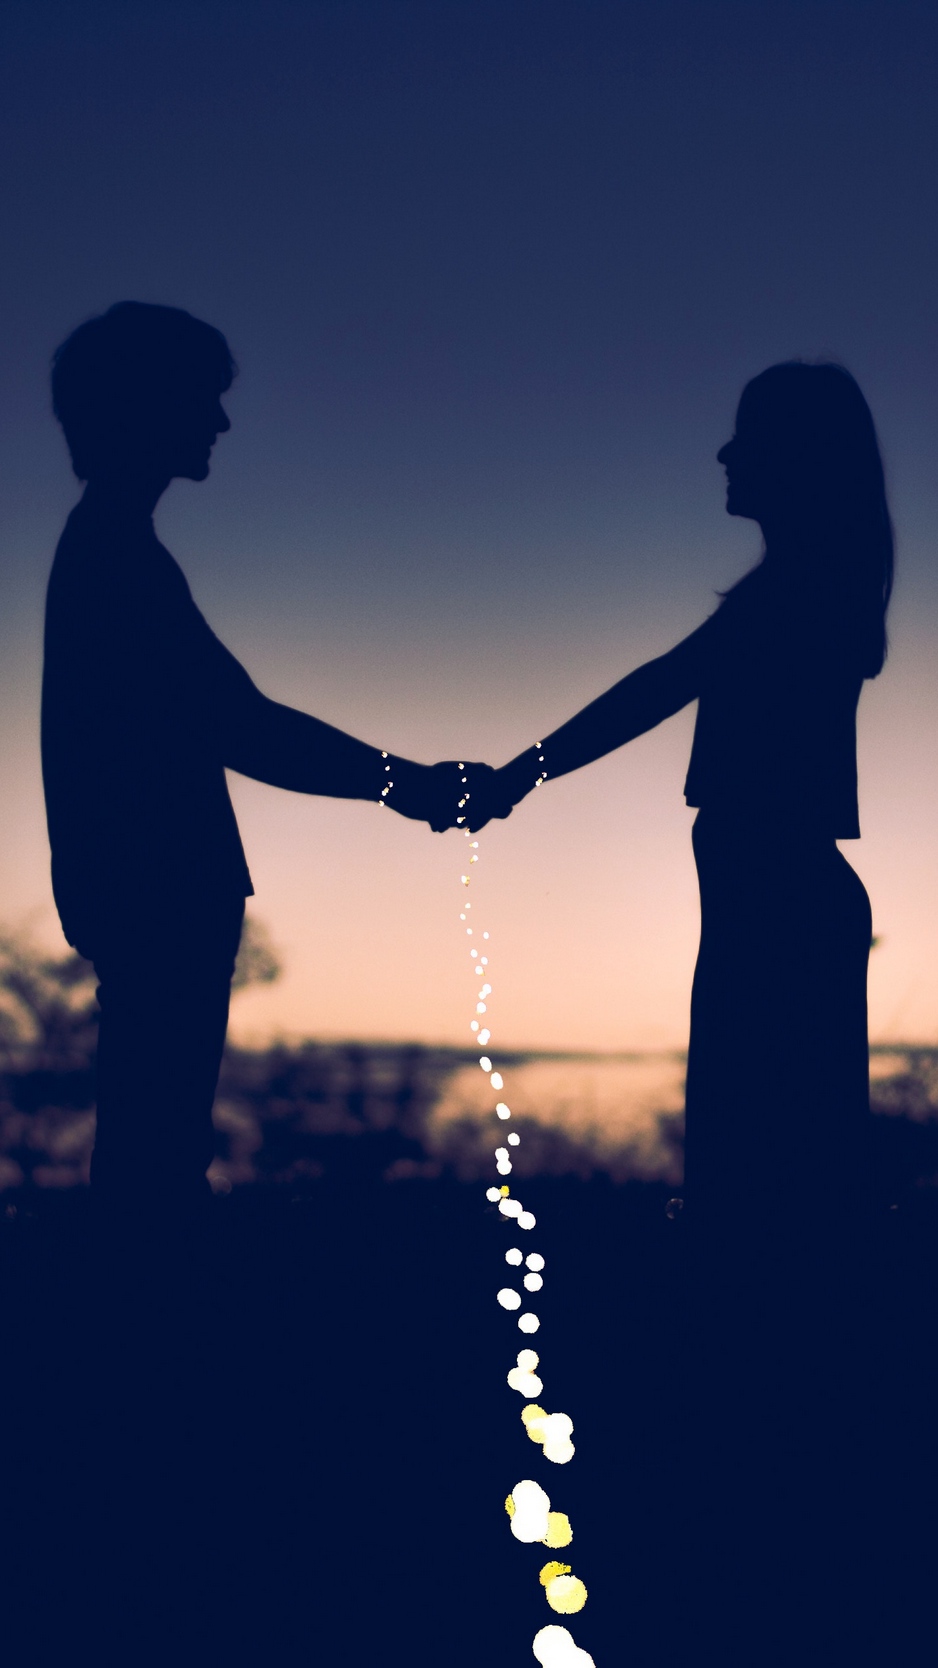 Wallpaper Couple, Love, Silhouettes, Happiness - Iphone Wallpaper Love  Couple - 938x1668 Wallpaper 